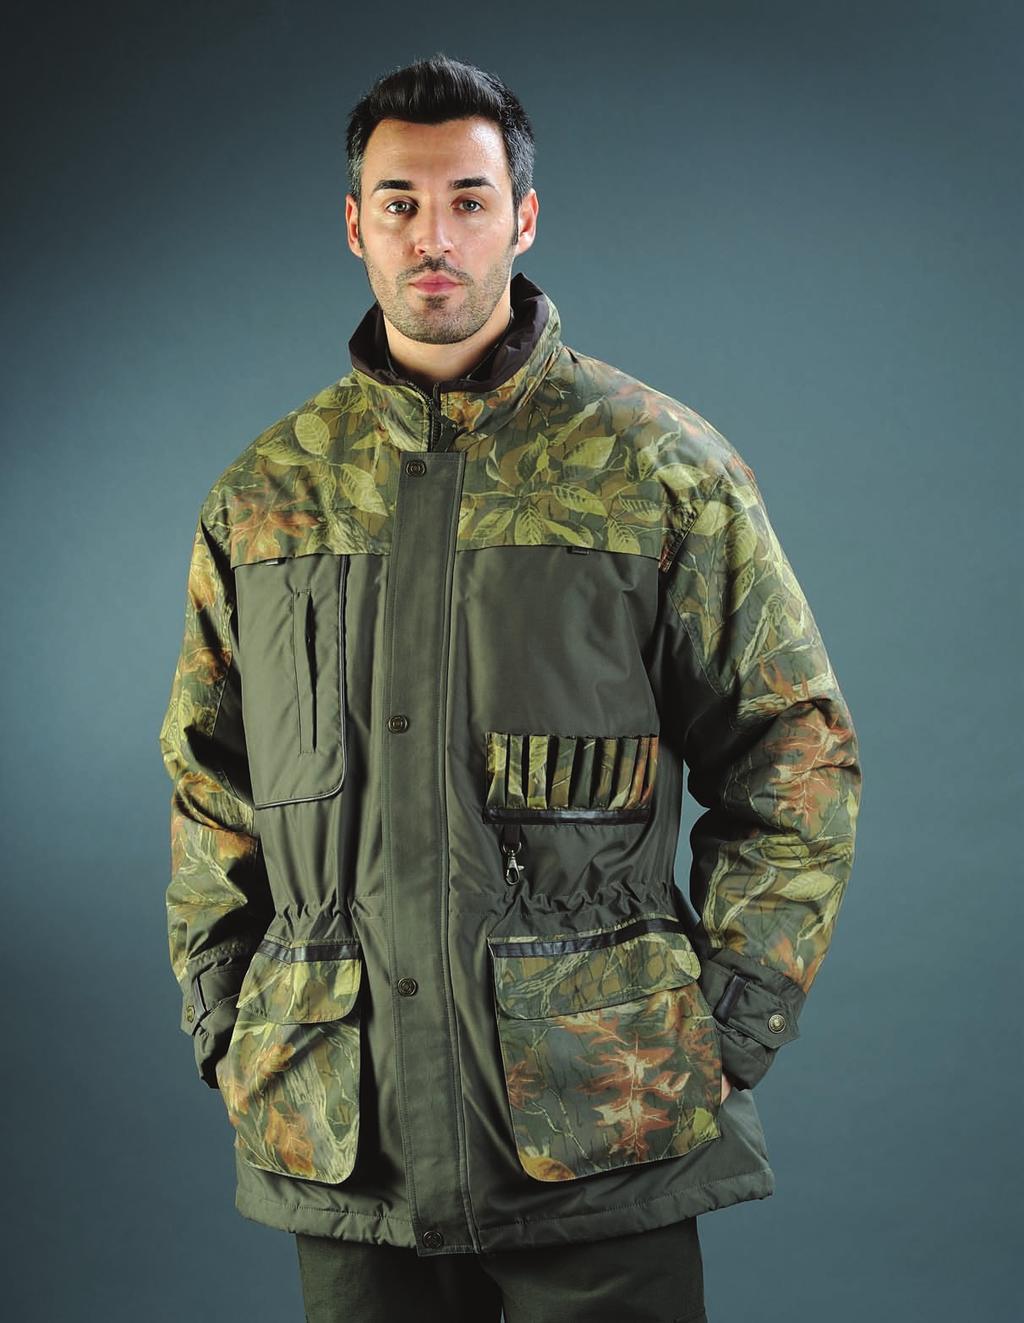 HUNTING WINTER JACKET CODE 10-1343 High volume functional pockets with flaps.